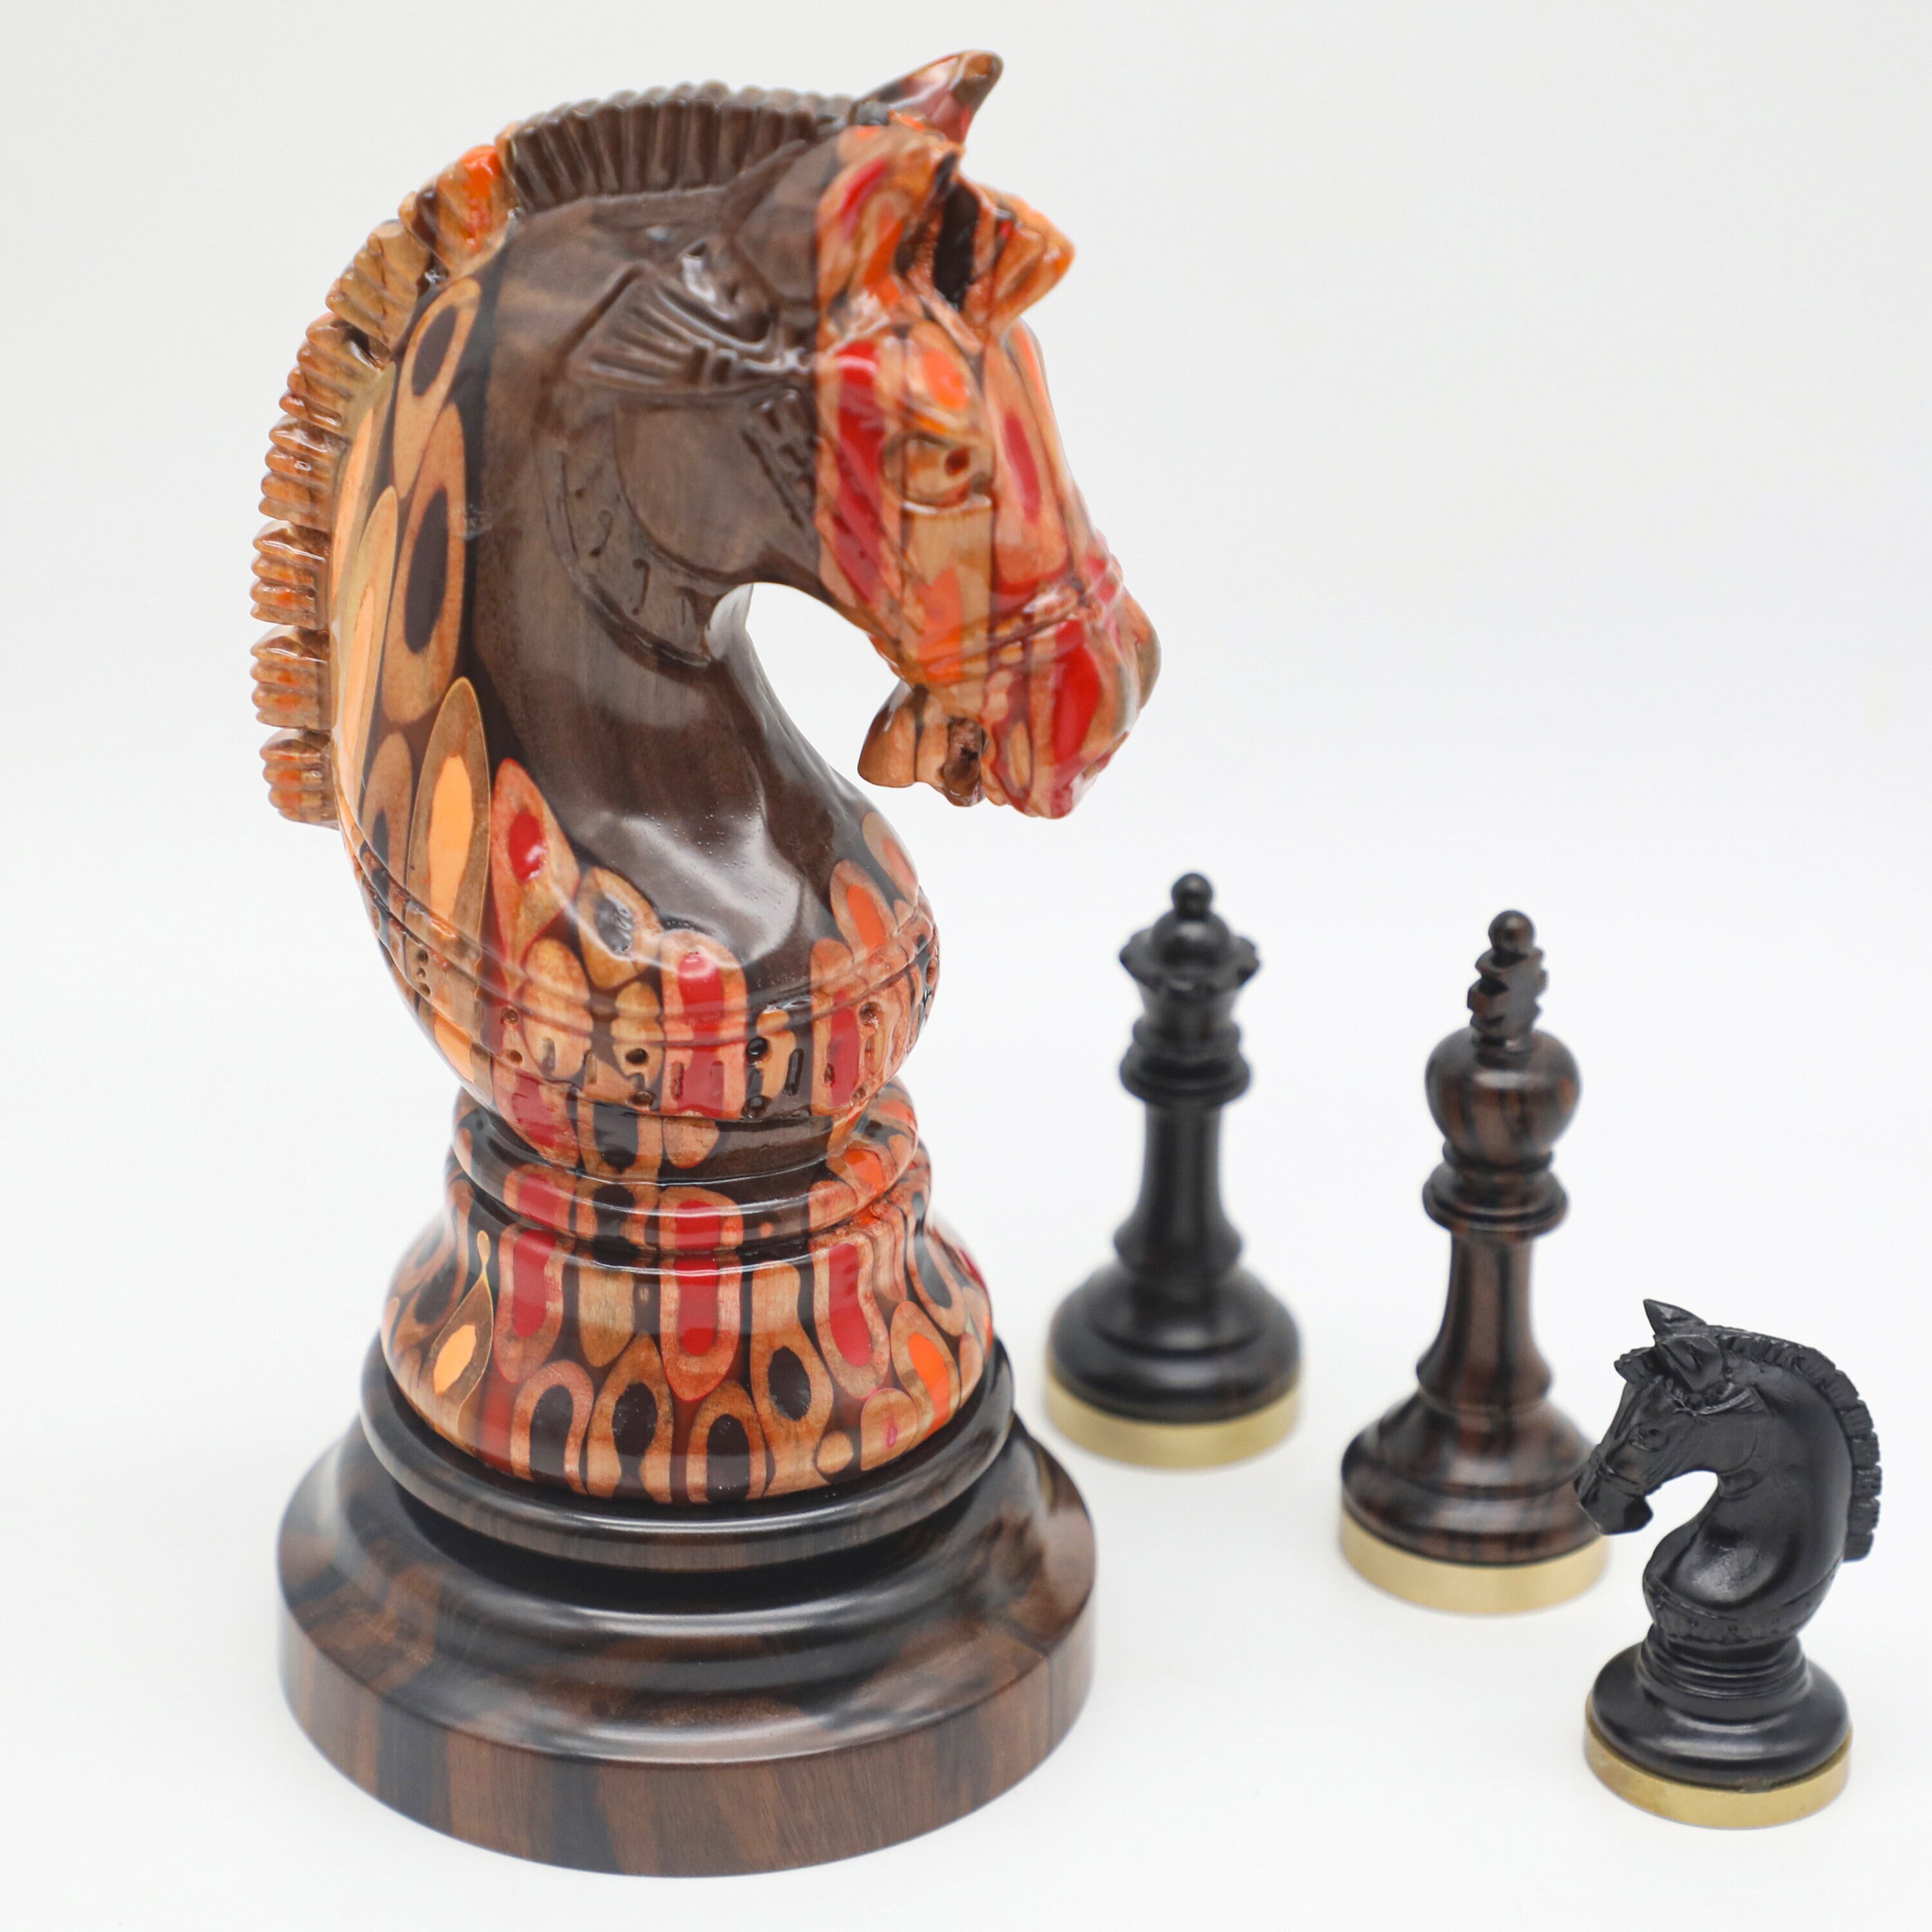 Special Edition Giant Deluxe Chess Piece the Knight Chess Made of Padauk  Burl Wood Casted With Resin for Decoration, Unique Gift 